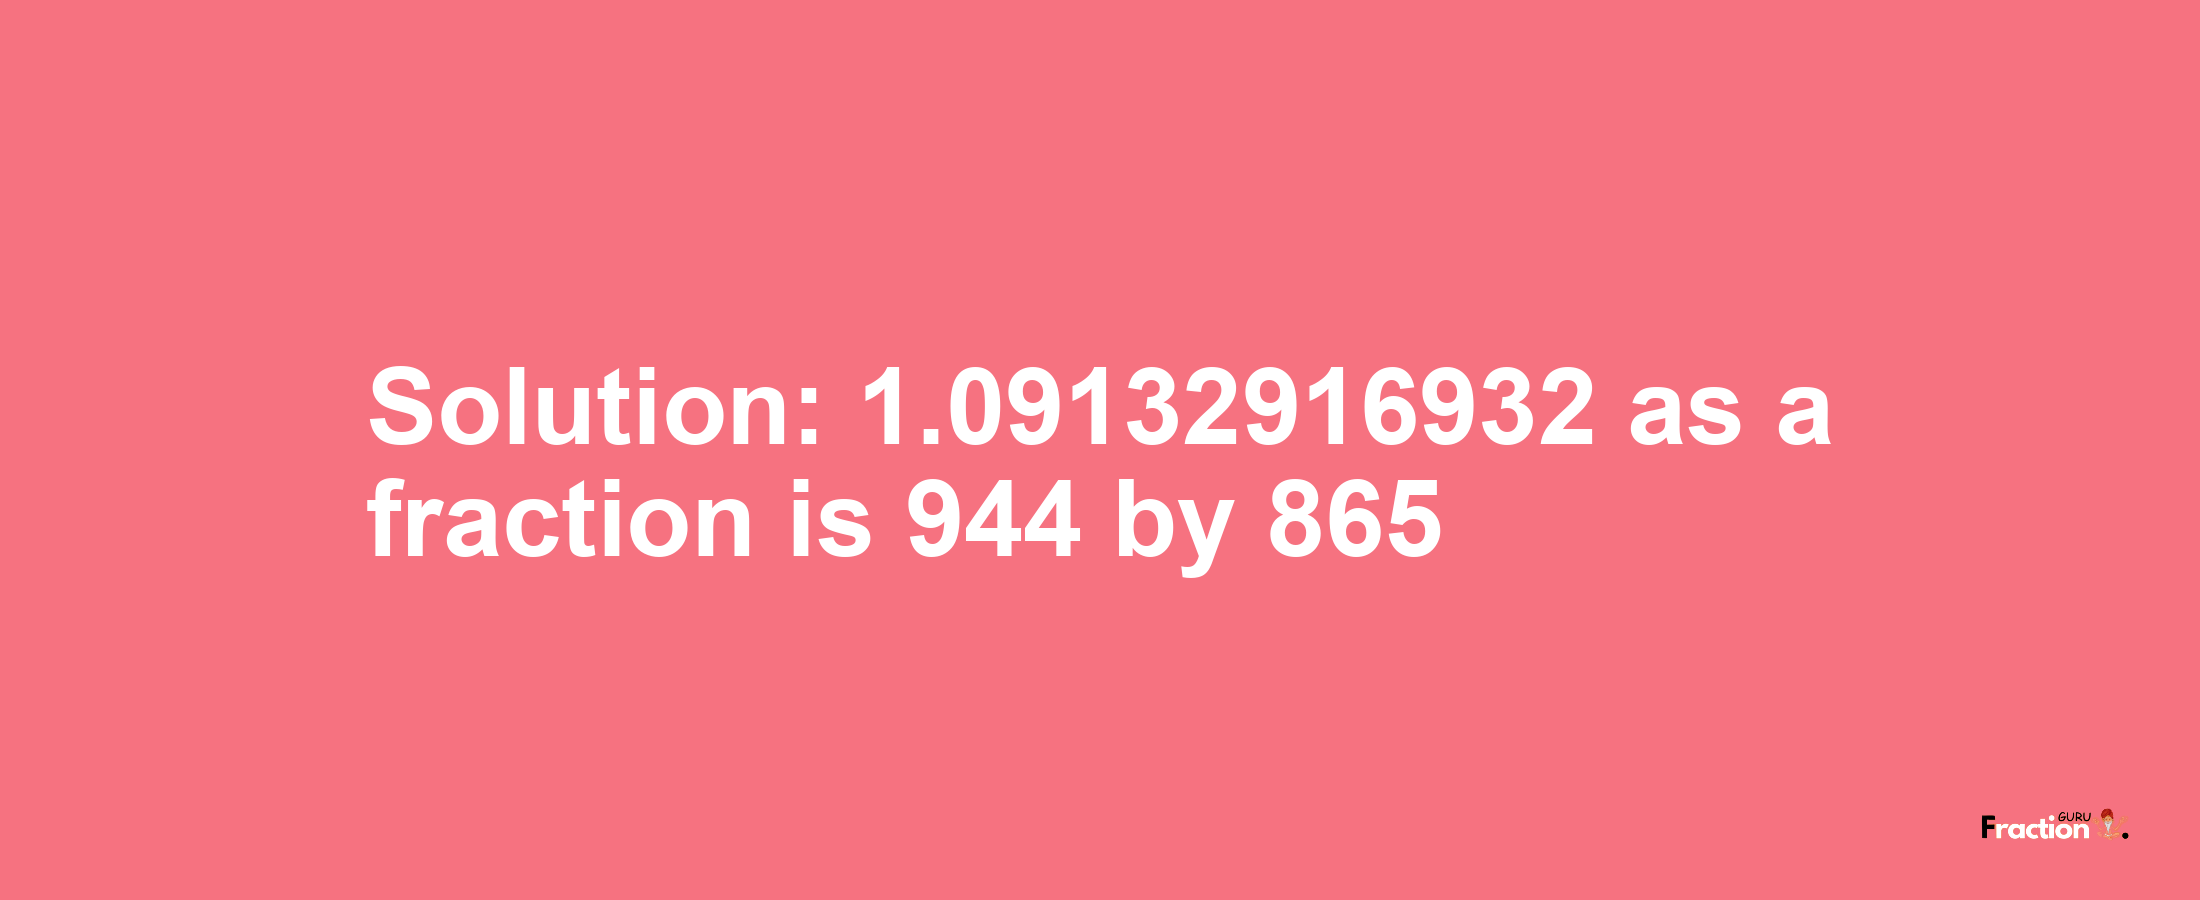 Solution:1.09132916932 as a fraction is 944/865